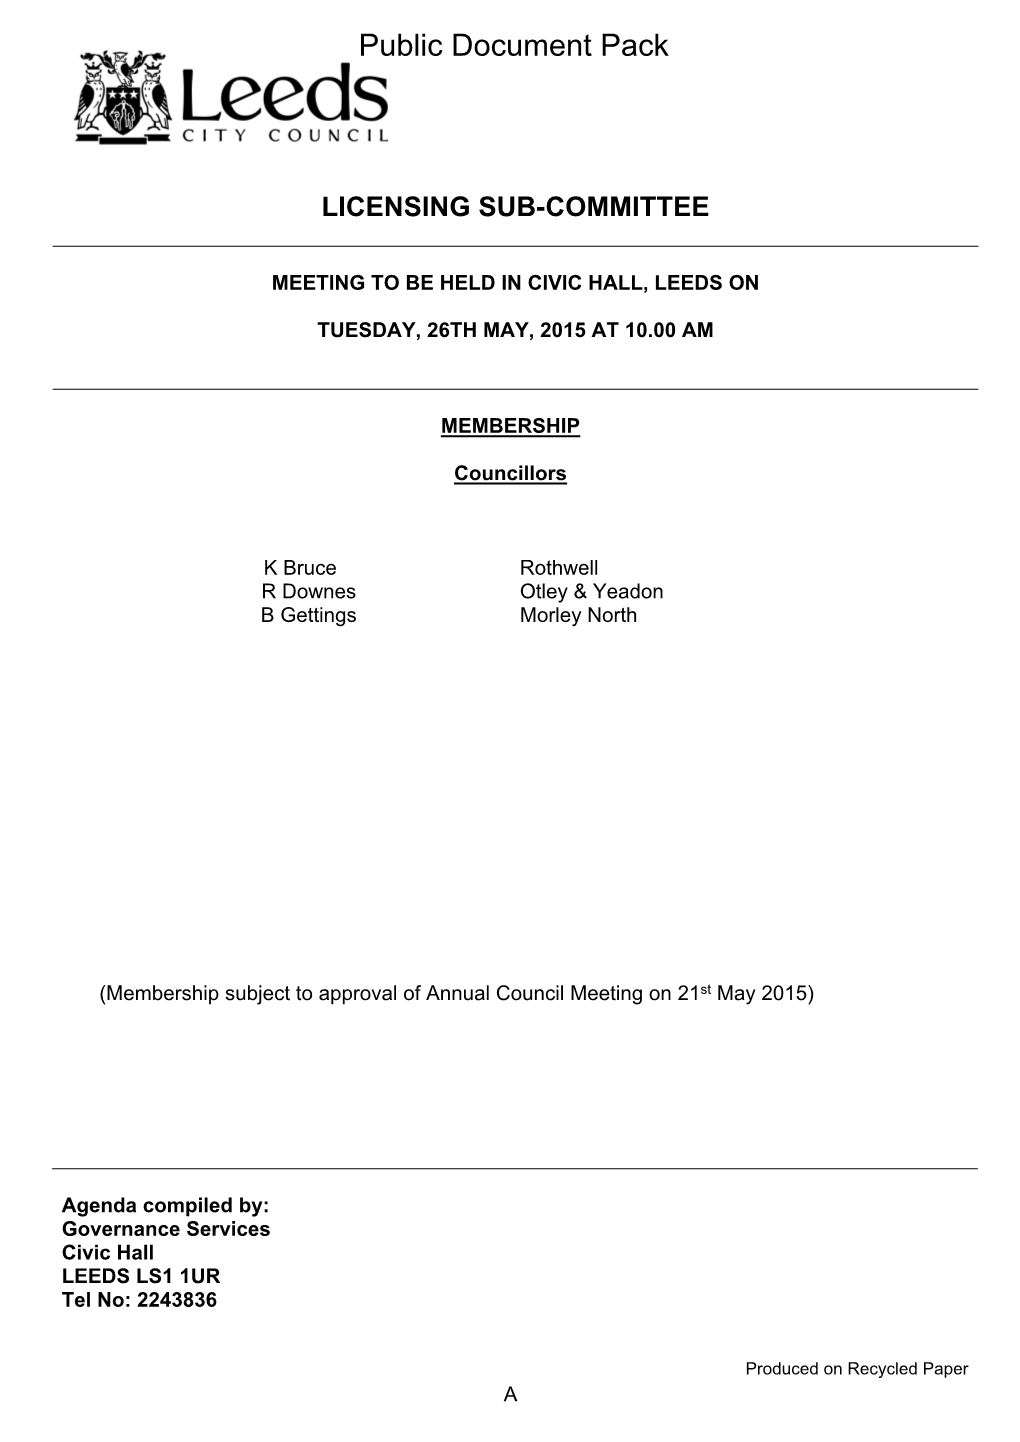 Agenda Document for Licensing Sub-Committee, 26/05/2015 10:00